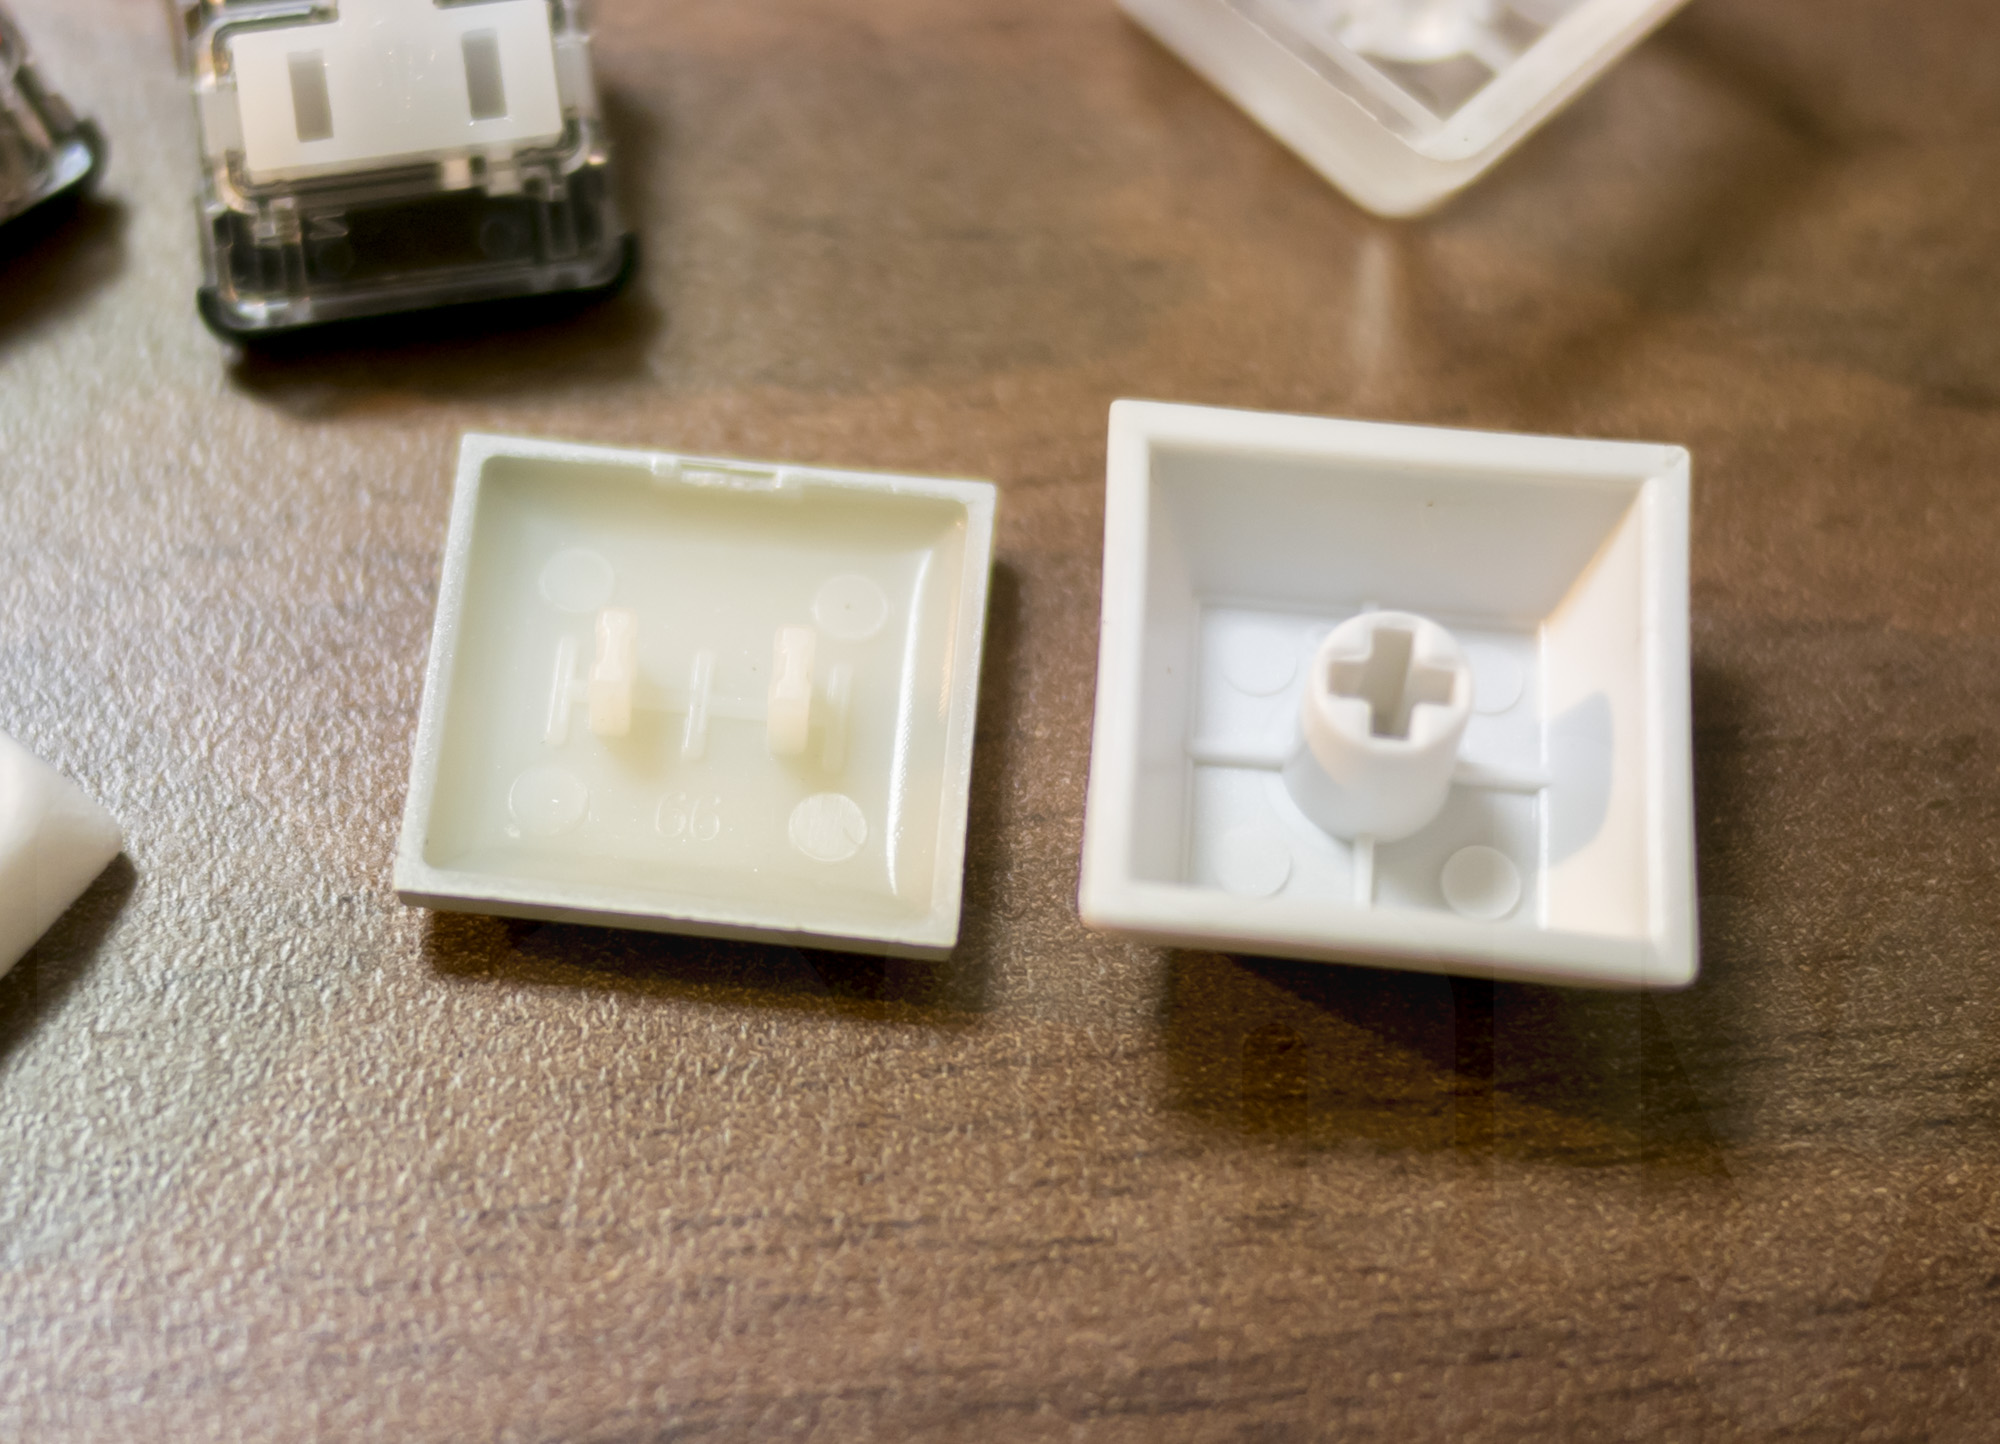 Kailh Low Profile Switche Keycap compare to normal: Inside